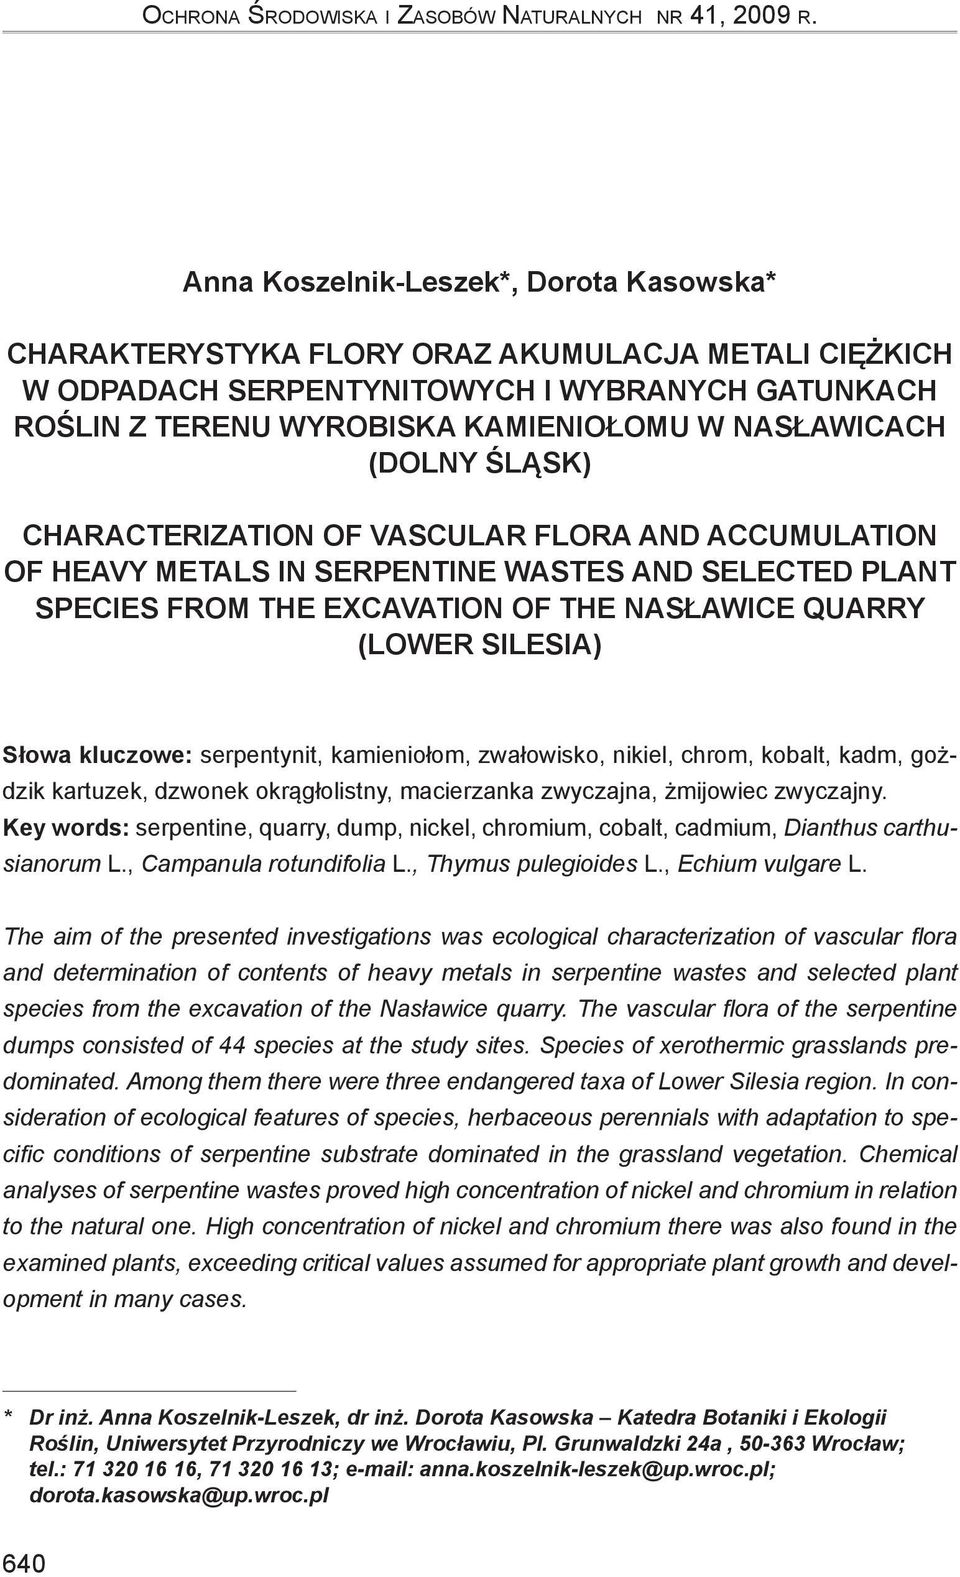 (DOLNY ŚLĄSK) CHARACTERIZATION OF VASCULAR FLORA AND ACCUMULATION OF HEAVY METALS IN SERPENTINE WASTES AND SELECTED PLANT SPECIES FROM THE EXCAVATION OF THE NASŁAWICE QUARRY (LOWER SILESIA) Słowa